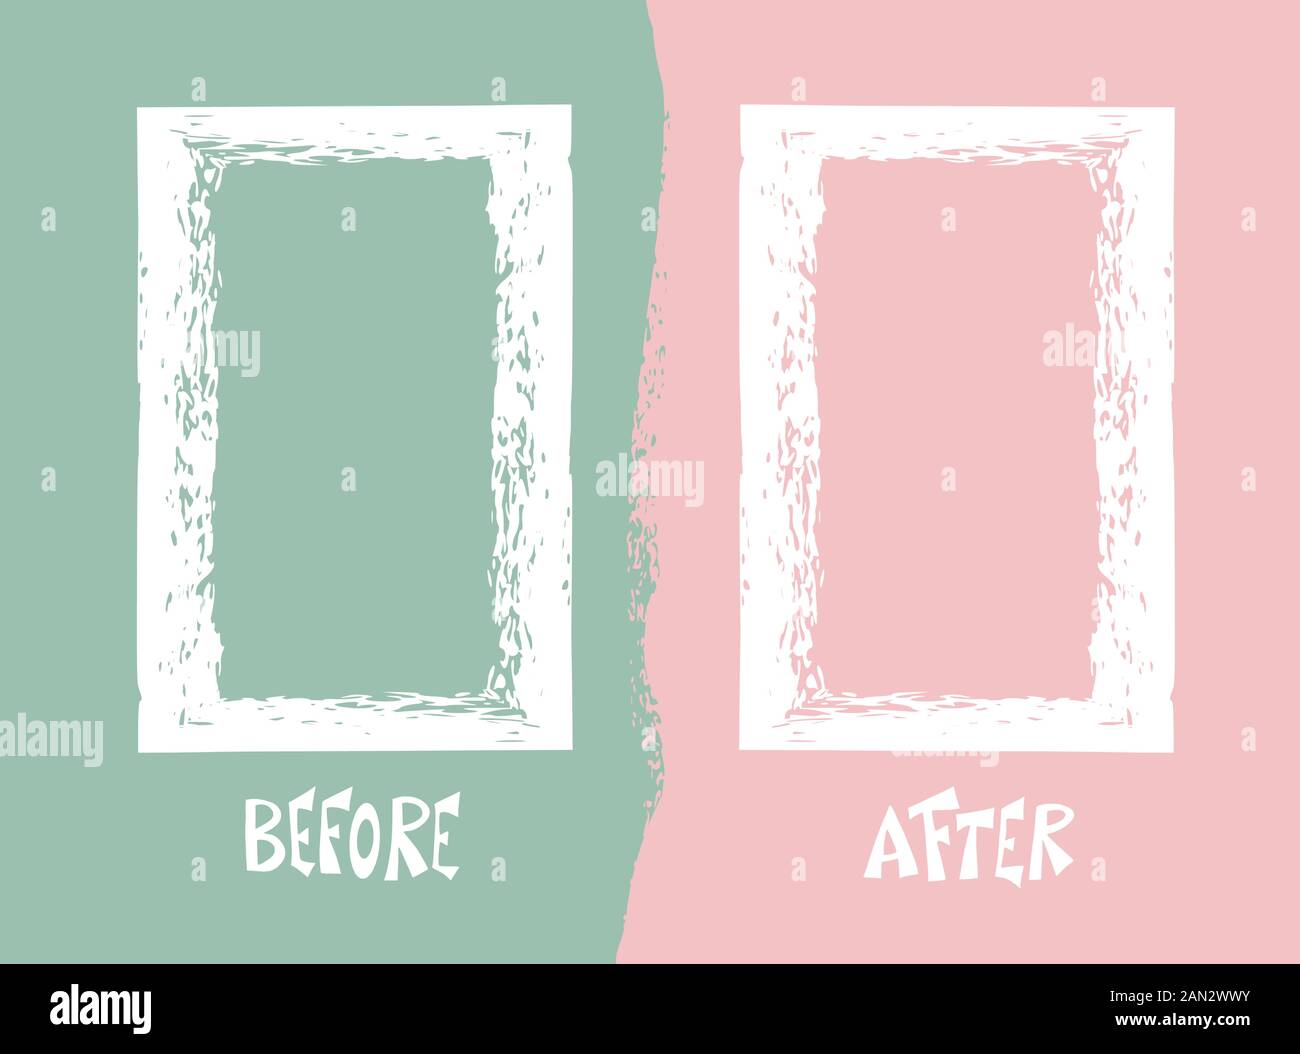 Before And After Template Progress Banner With Copy Space For Picture Vector Illustartion Stock Vector Image Art Alamy